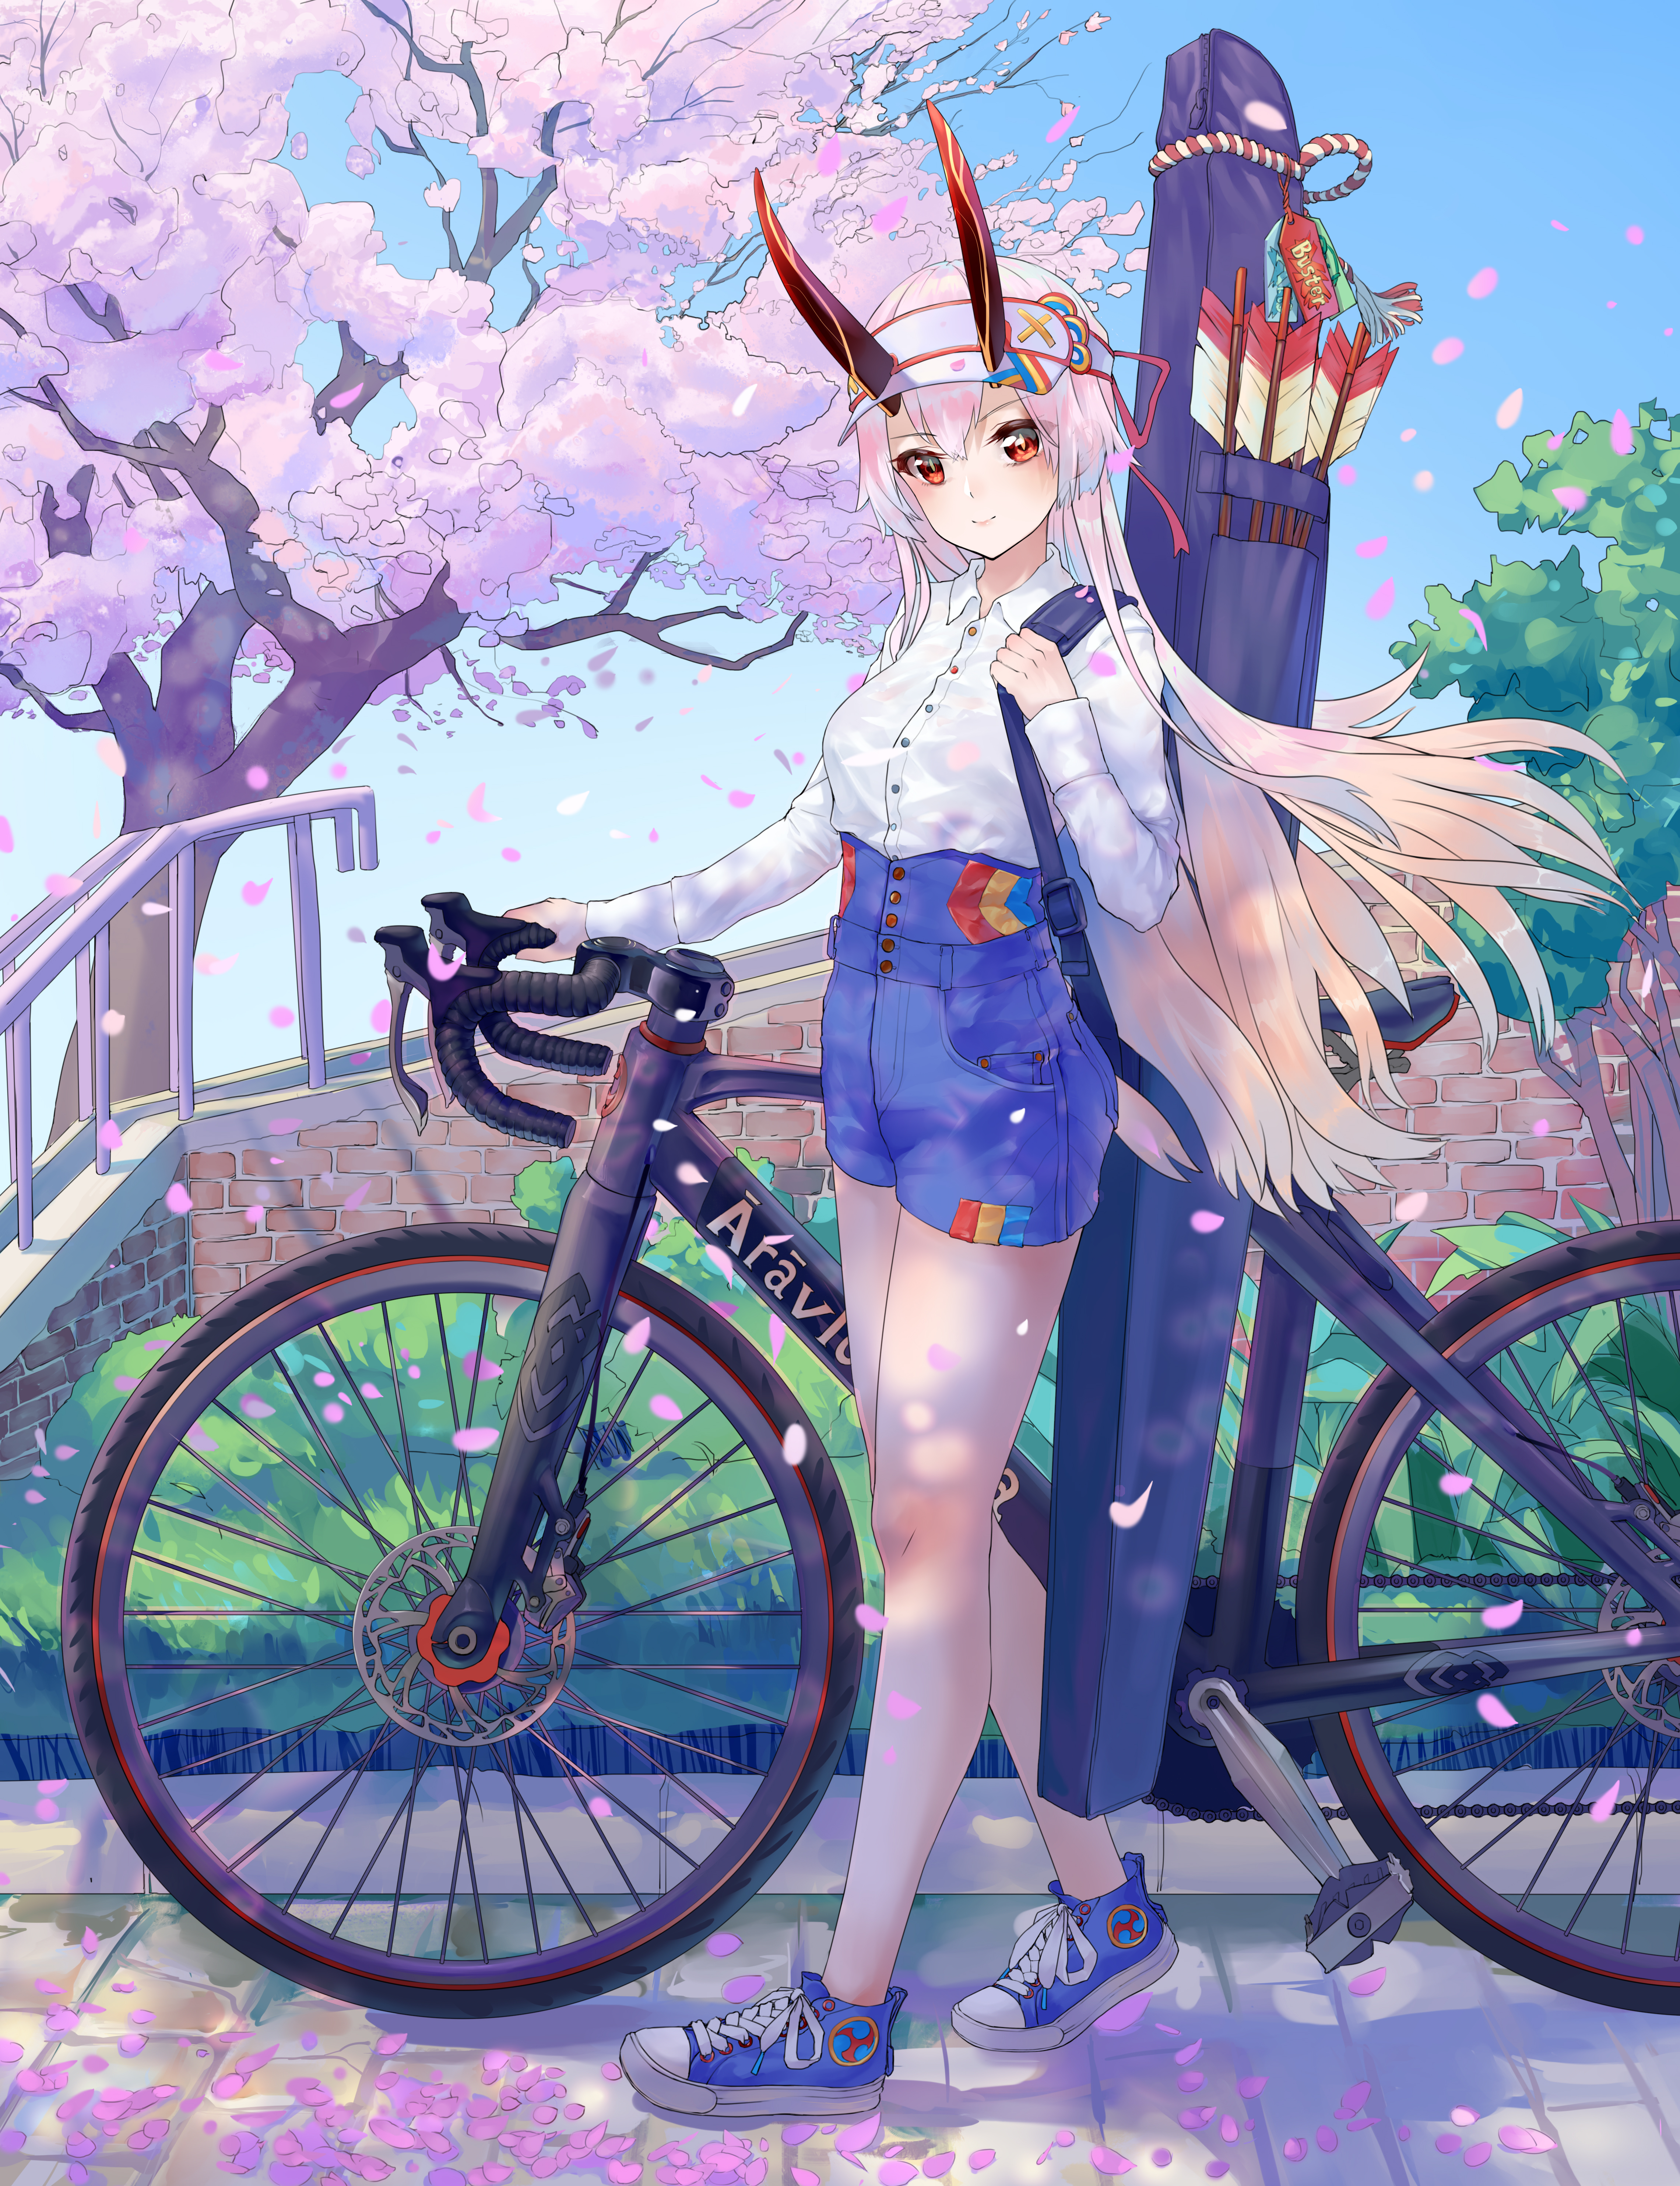 Fate Series Fate Grand Order Tomoe Gozen Fate Grand Order Anime Girls Bicycle Petals Red Eyes Arrow 4562x5935